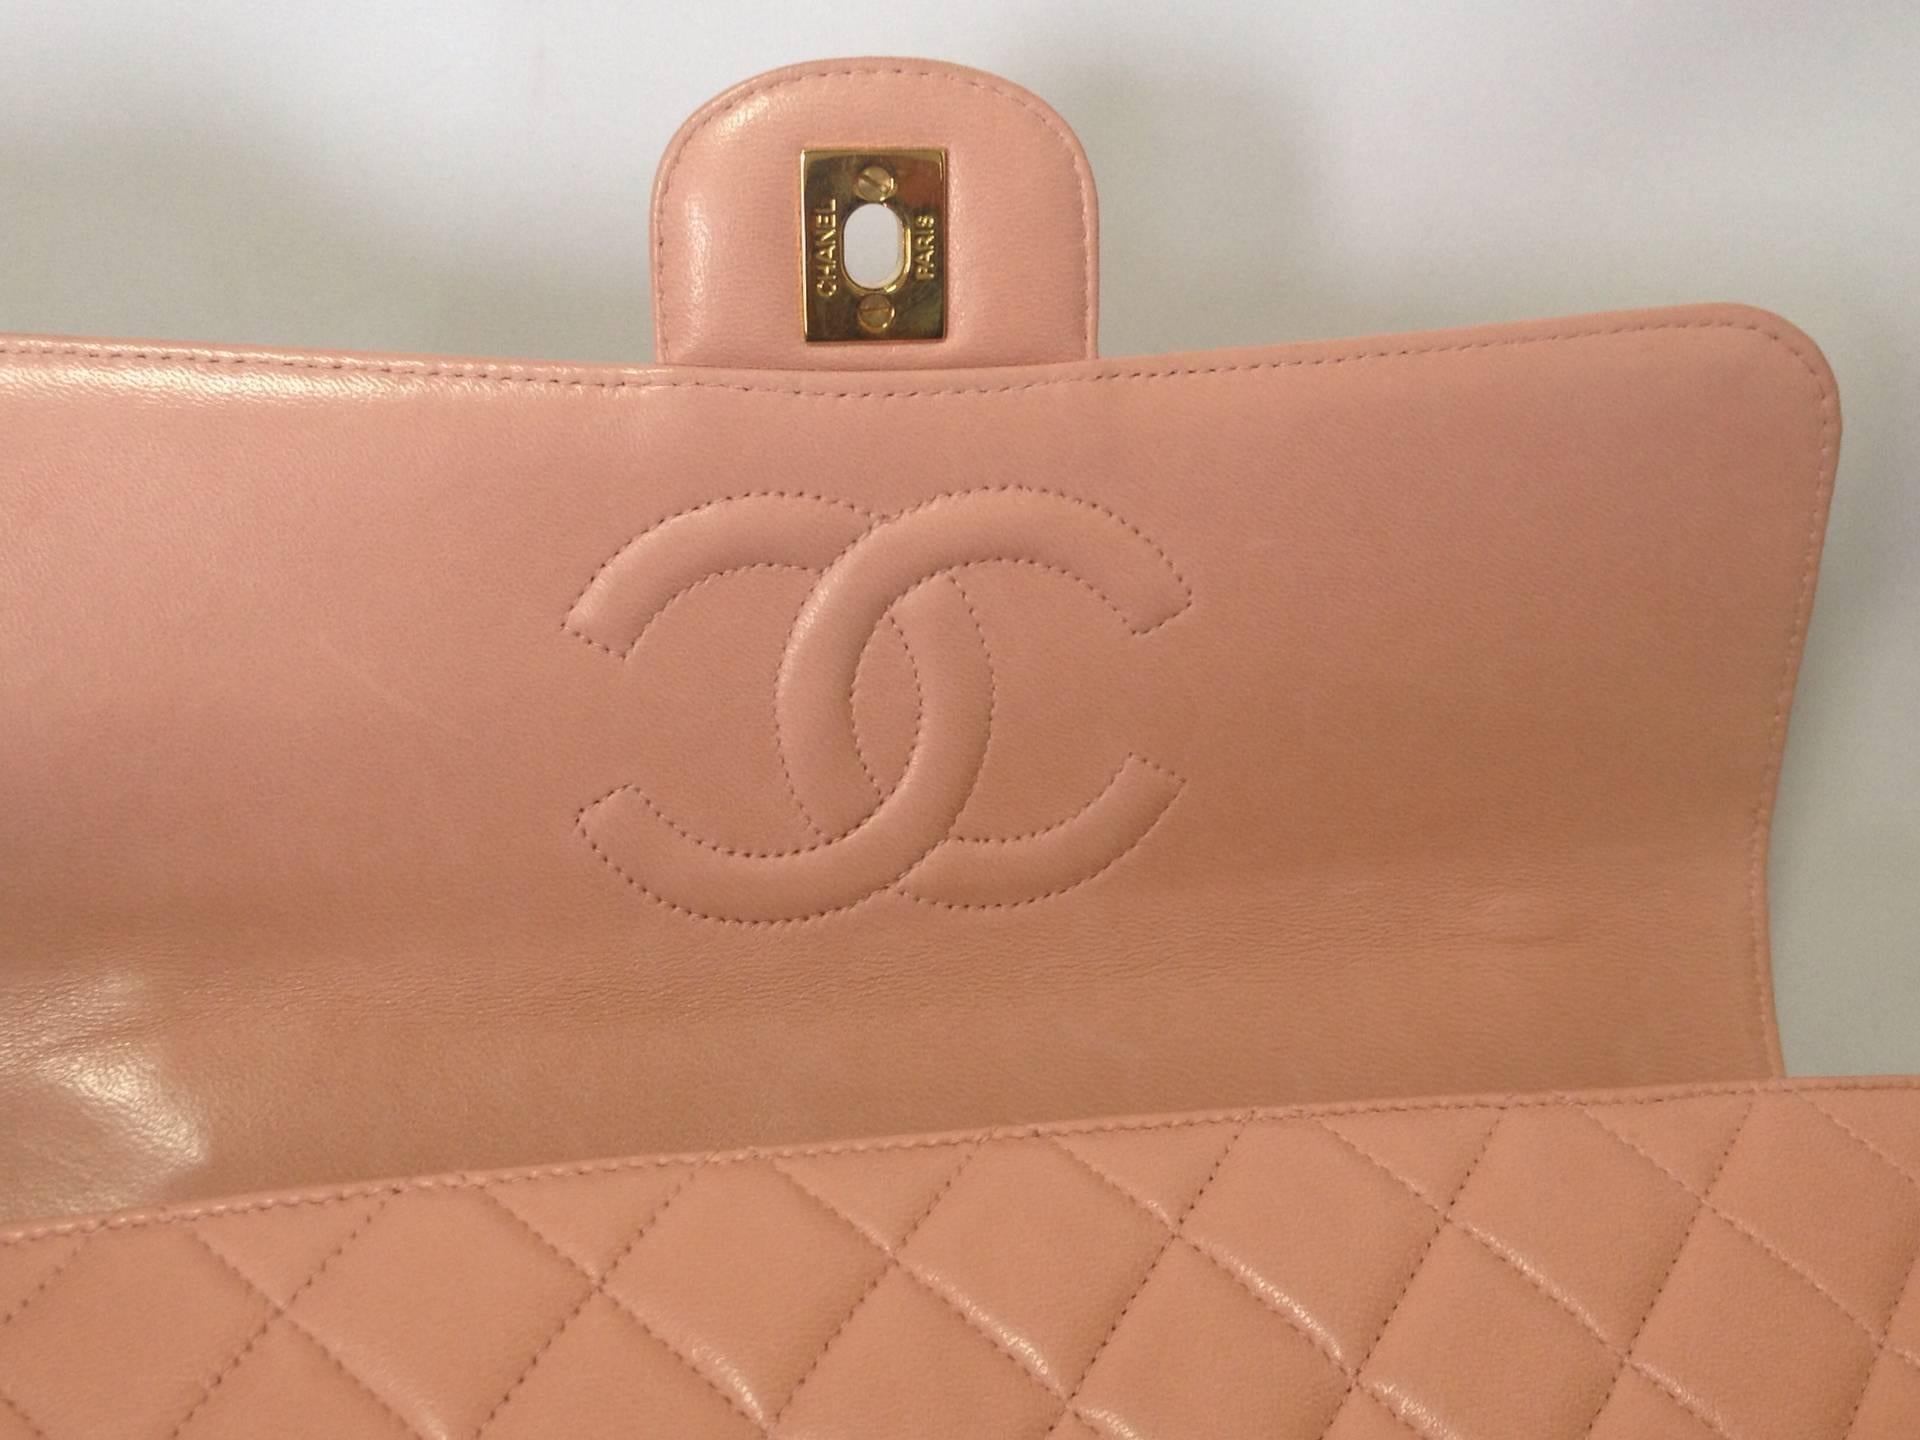 Vintage CHANEL milky pink color lambskin classic 2.55 handbag purse with gold CC For Sale 1